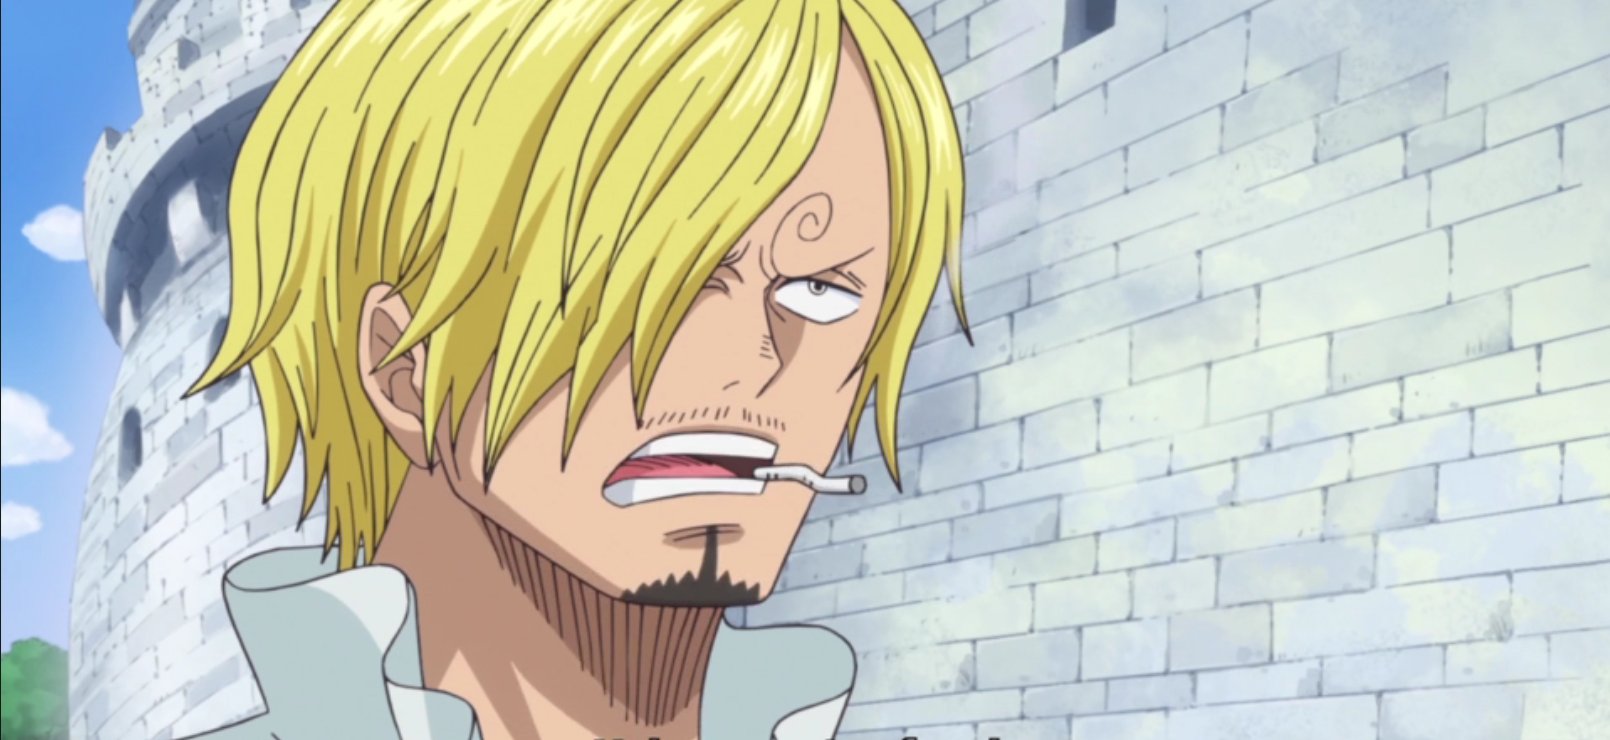 Funimation The Unhappy Father S Day Continues In The Newest One Piece Episode Watch Judge Vs Sanji Now T Co Ydpcq2xc8b T Co 9w1ubu4o6d Twitter